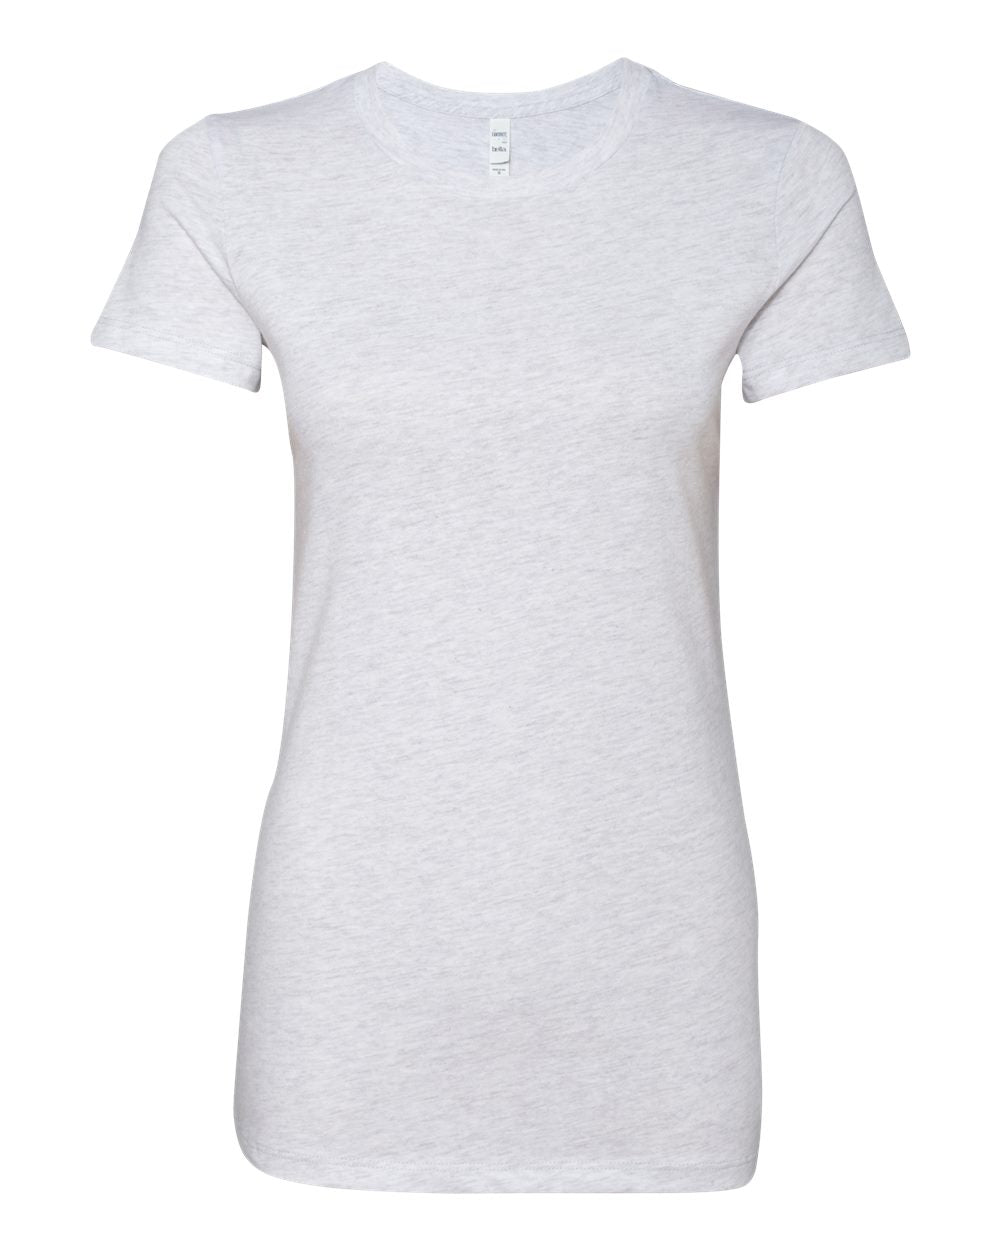 bella+canvas womens tee solid white blend